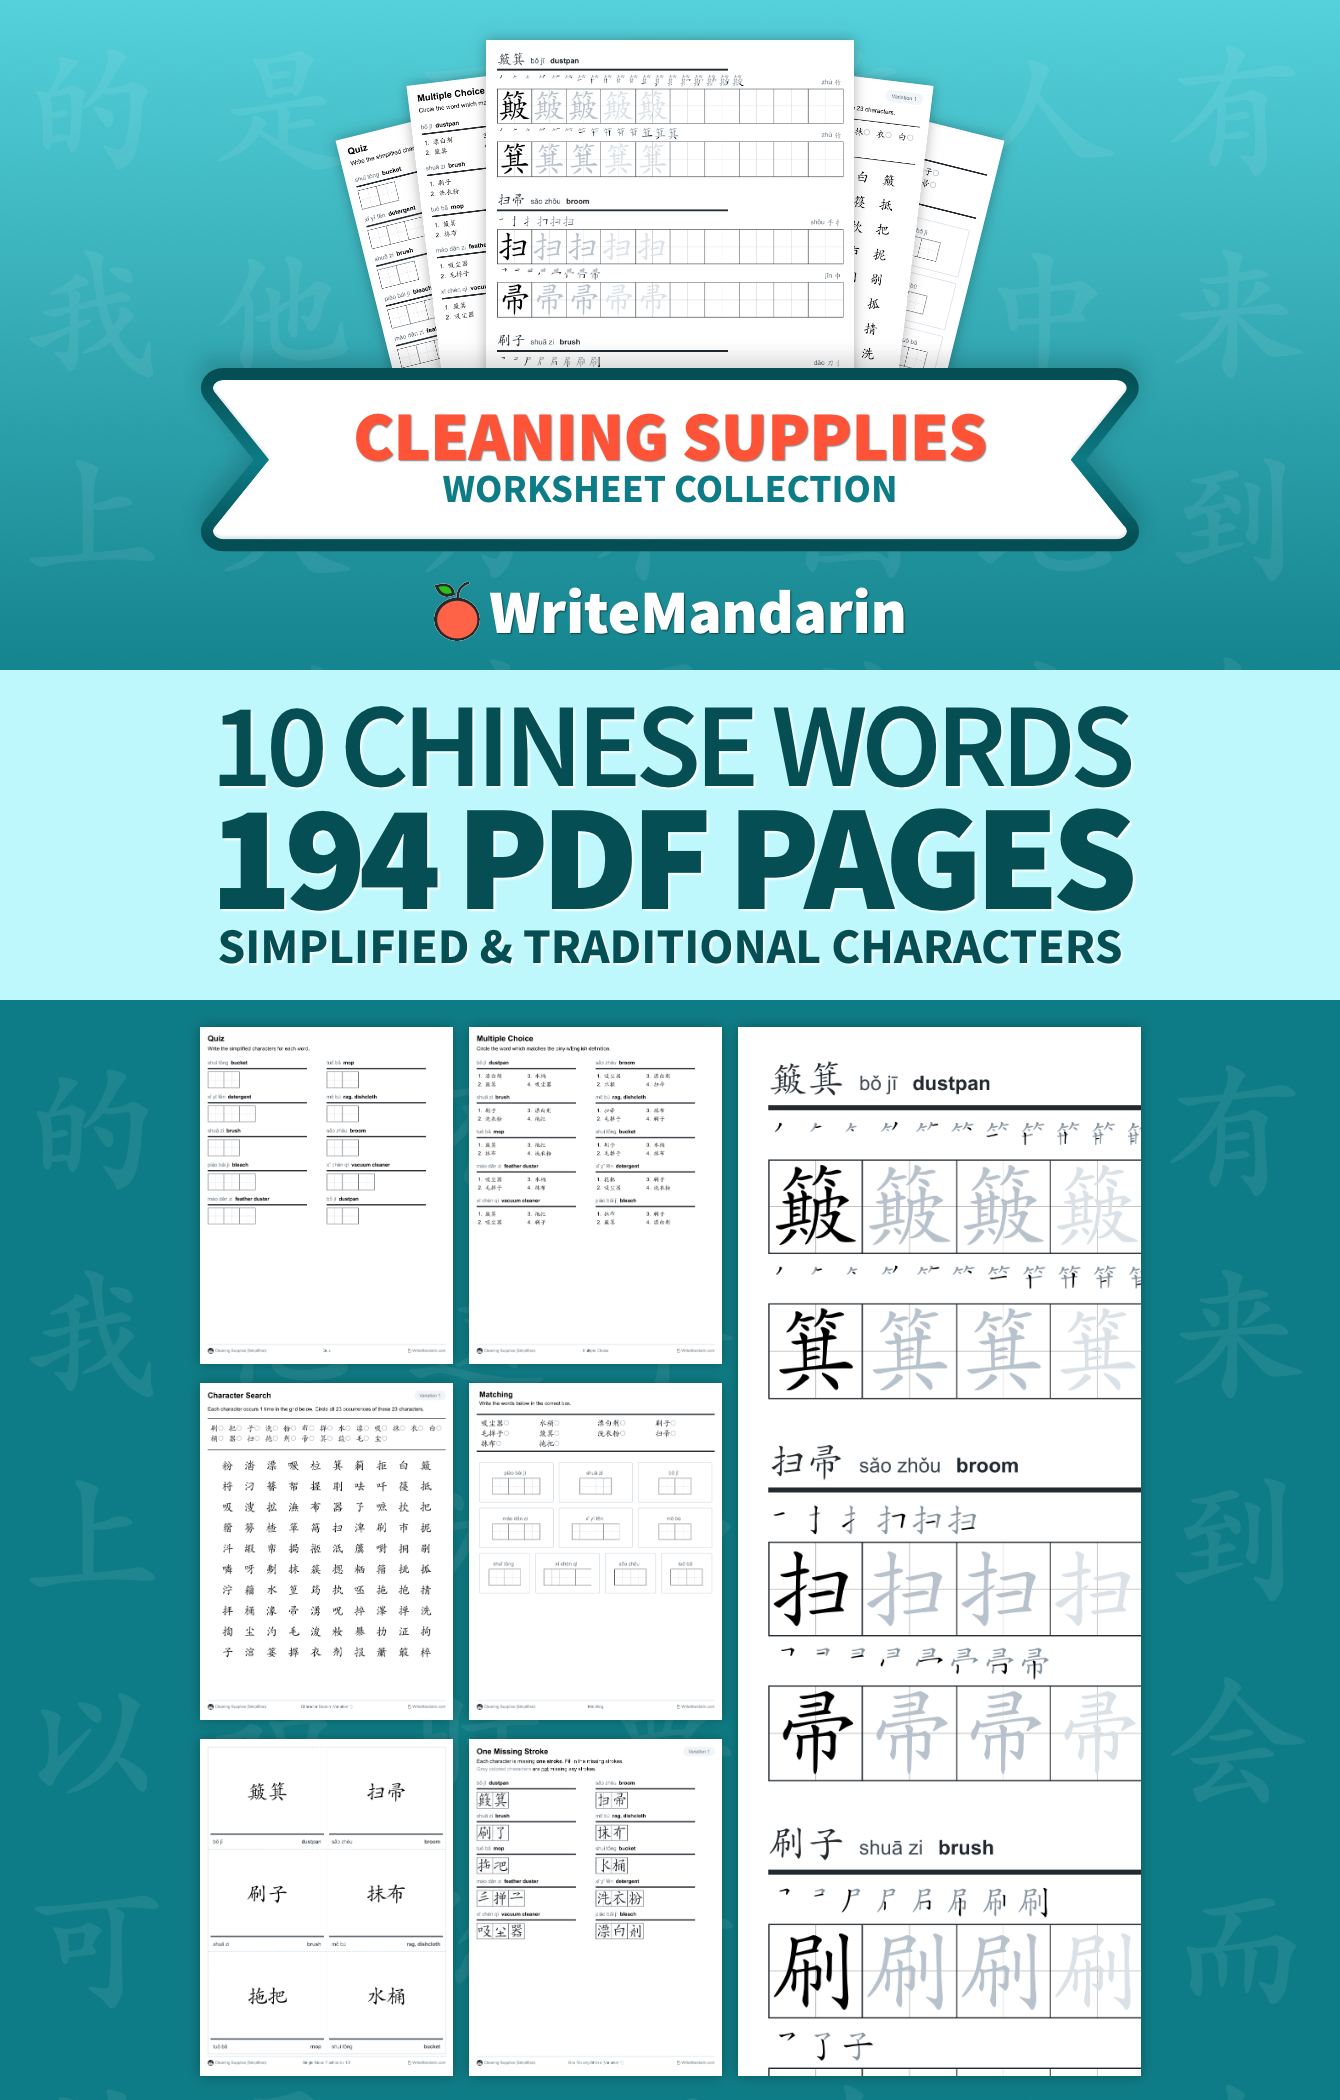 Preview image of Cleaning Supplies worksheet collection